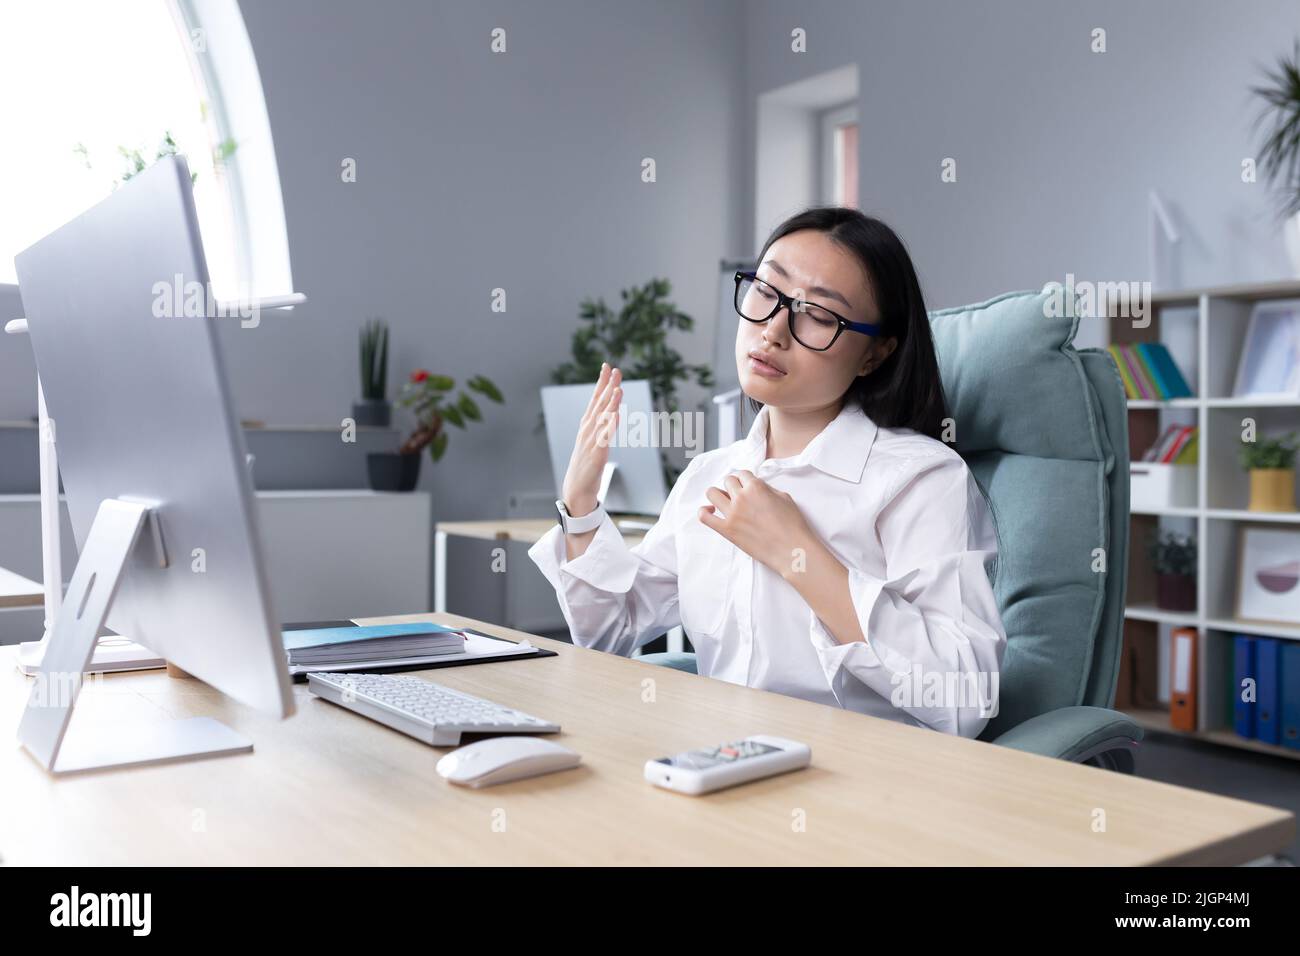 Heat in the workplace. Young Asian woman sitting in the office at the desk waving her hand, it's very hot, she feels bad, she needs fresh air, take a break. Stock Photo